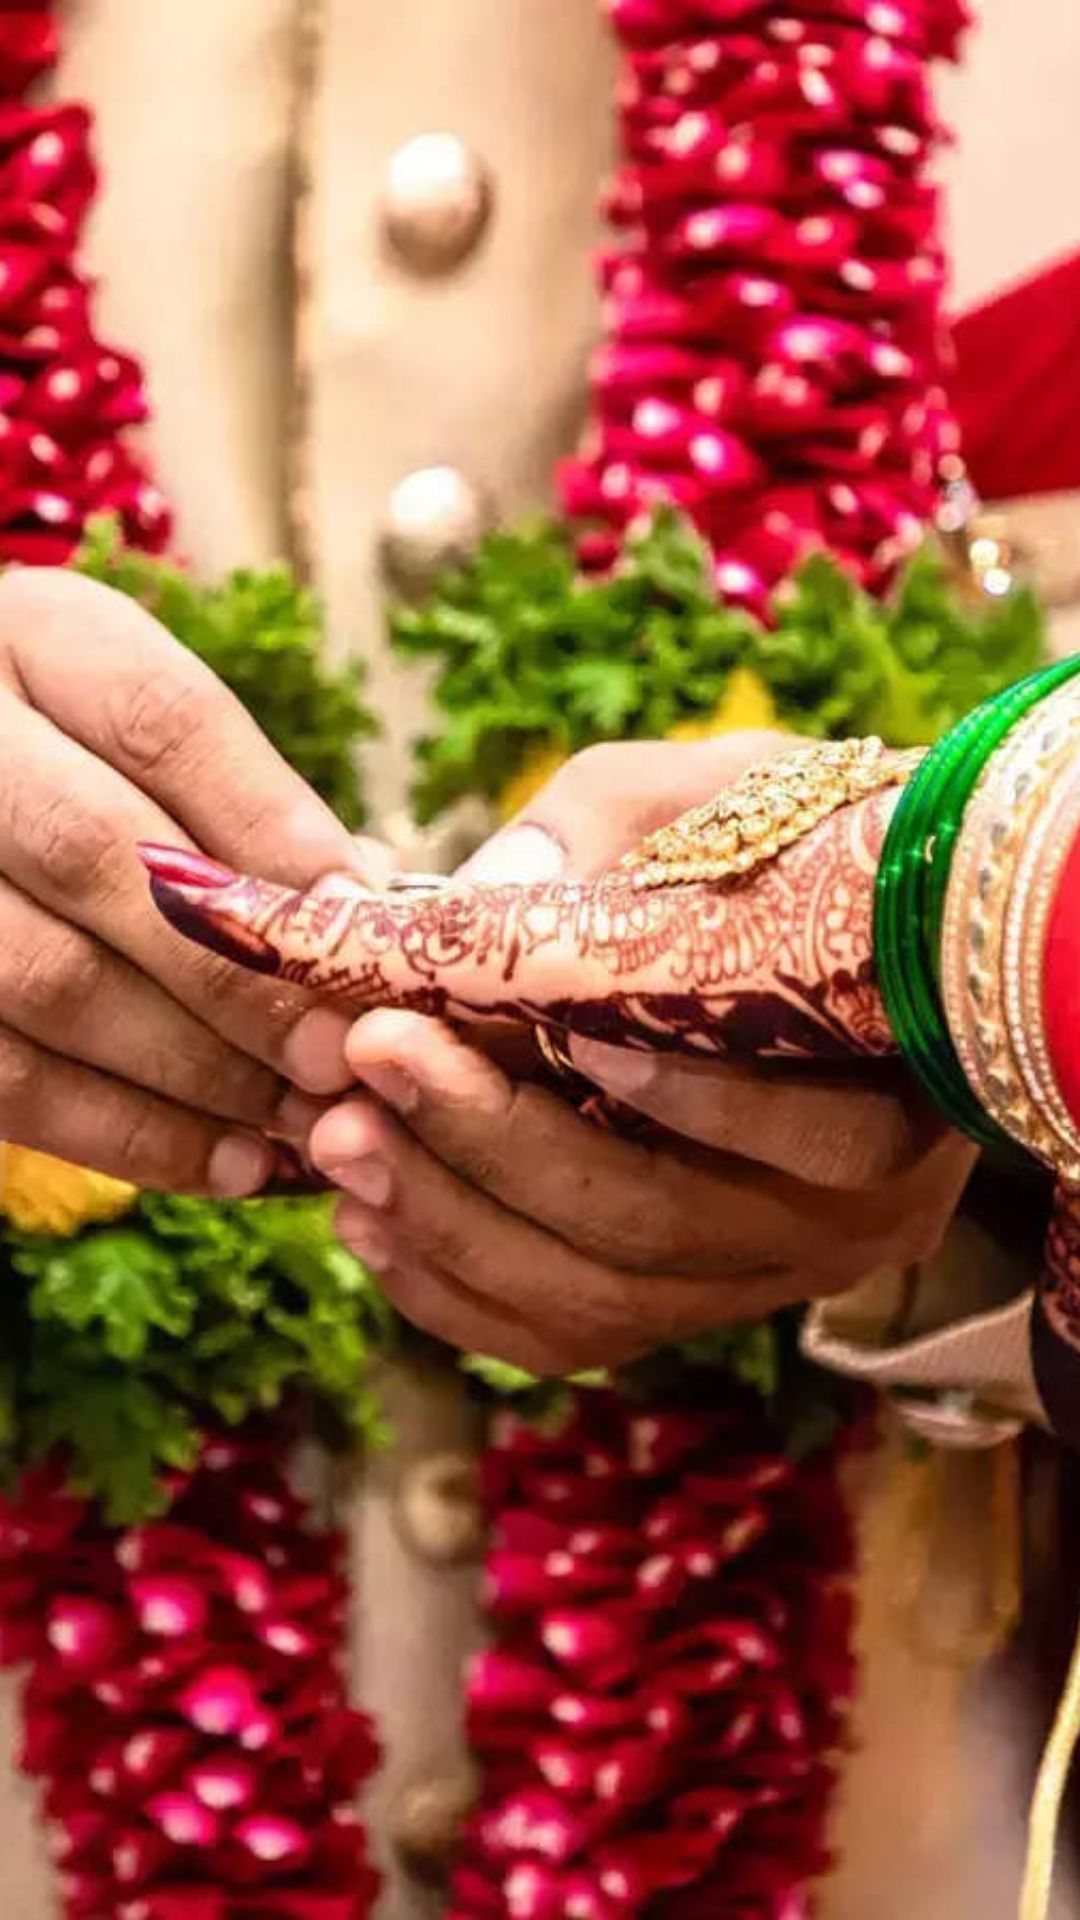 People in these 5 cities spend a lot on wedding by taking loans.